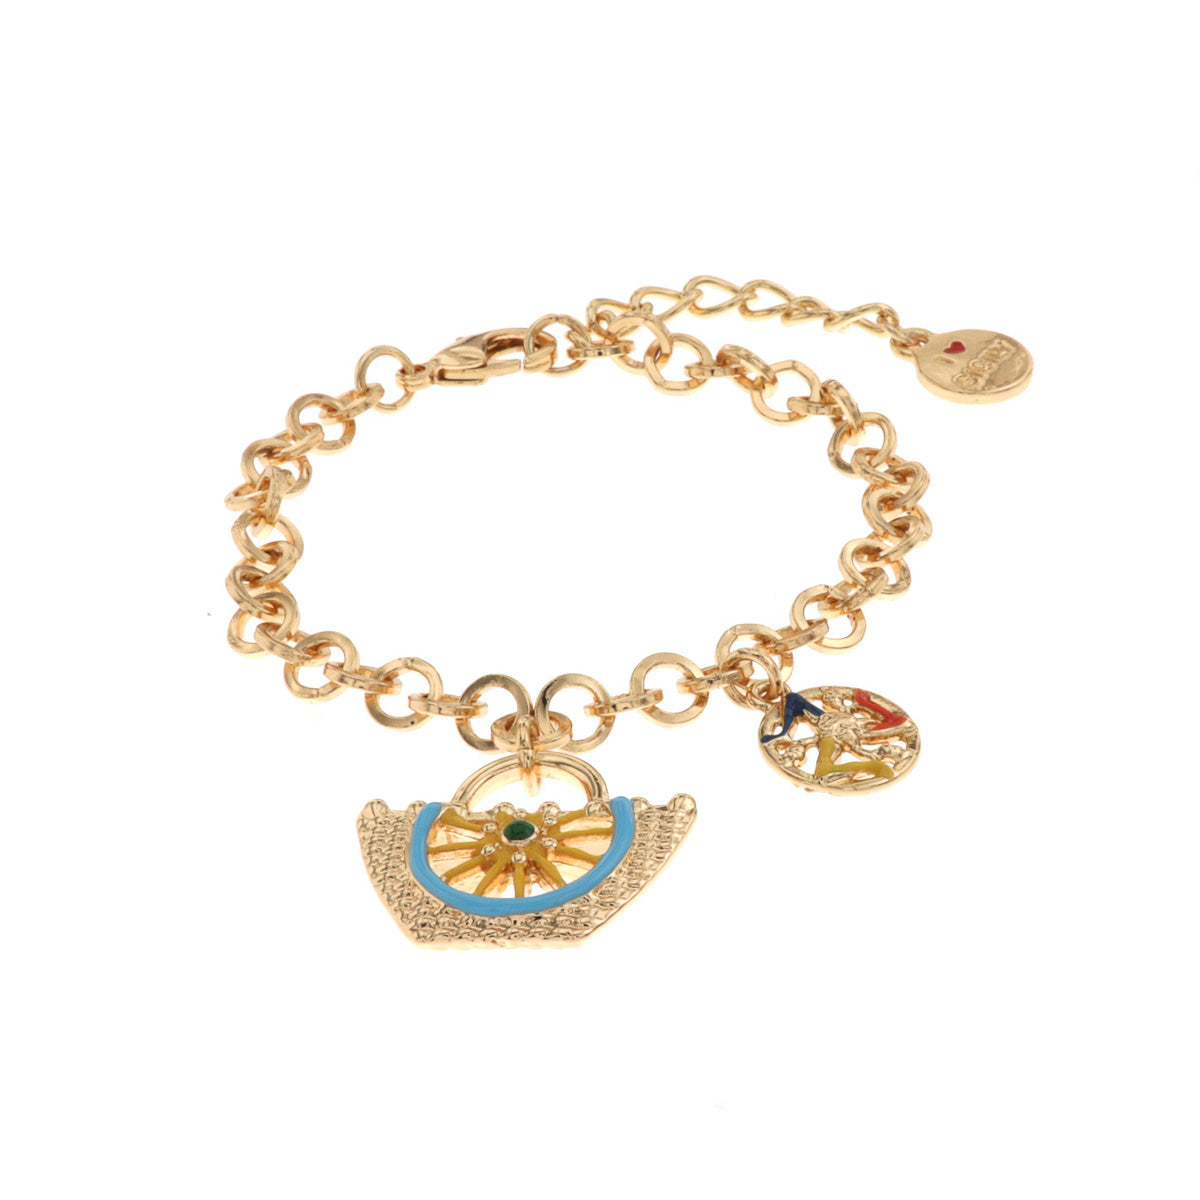 Metal bracelet in Rolò jersey with charm Coffa and Trinacria embellished with colored glazes